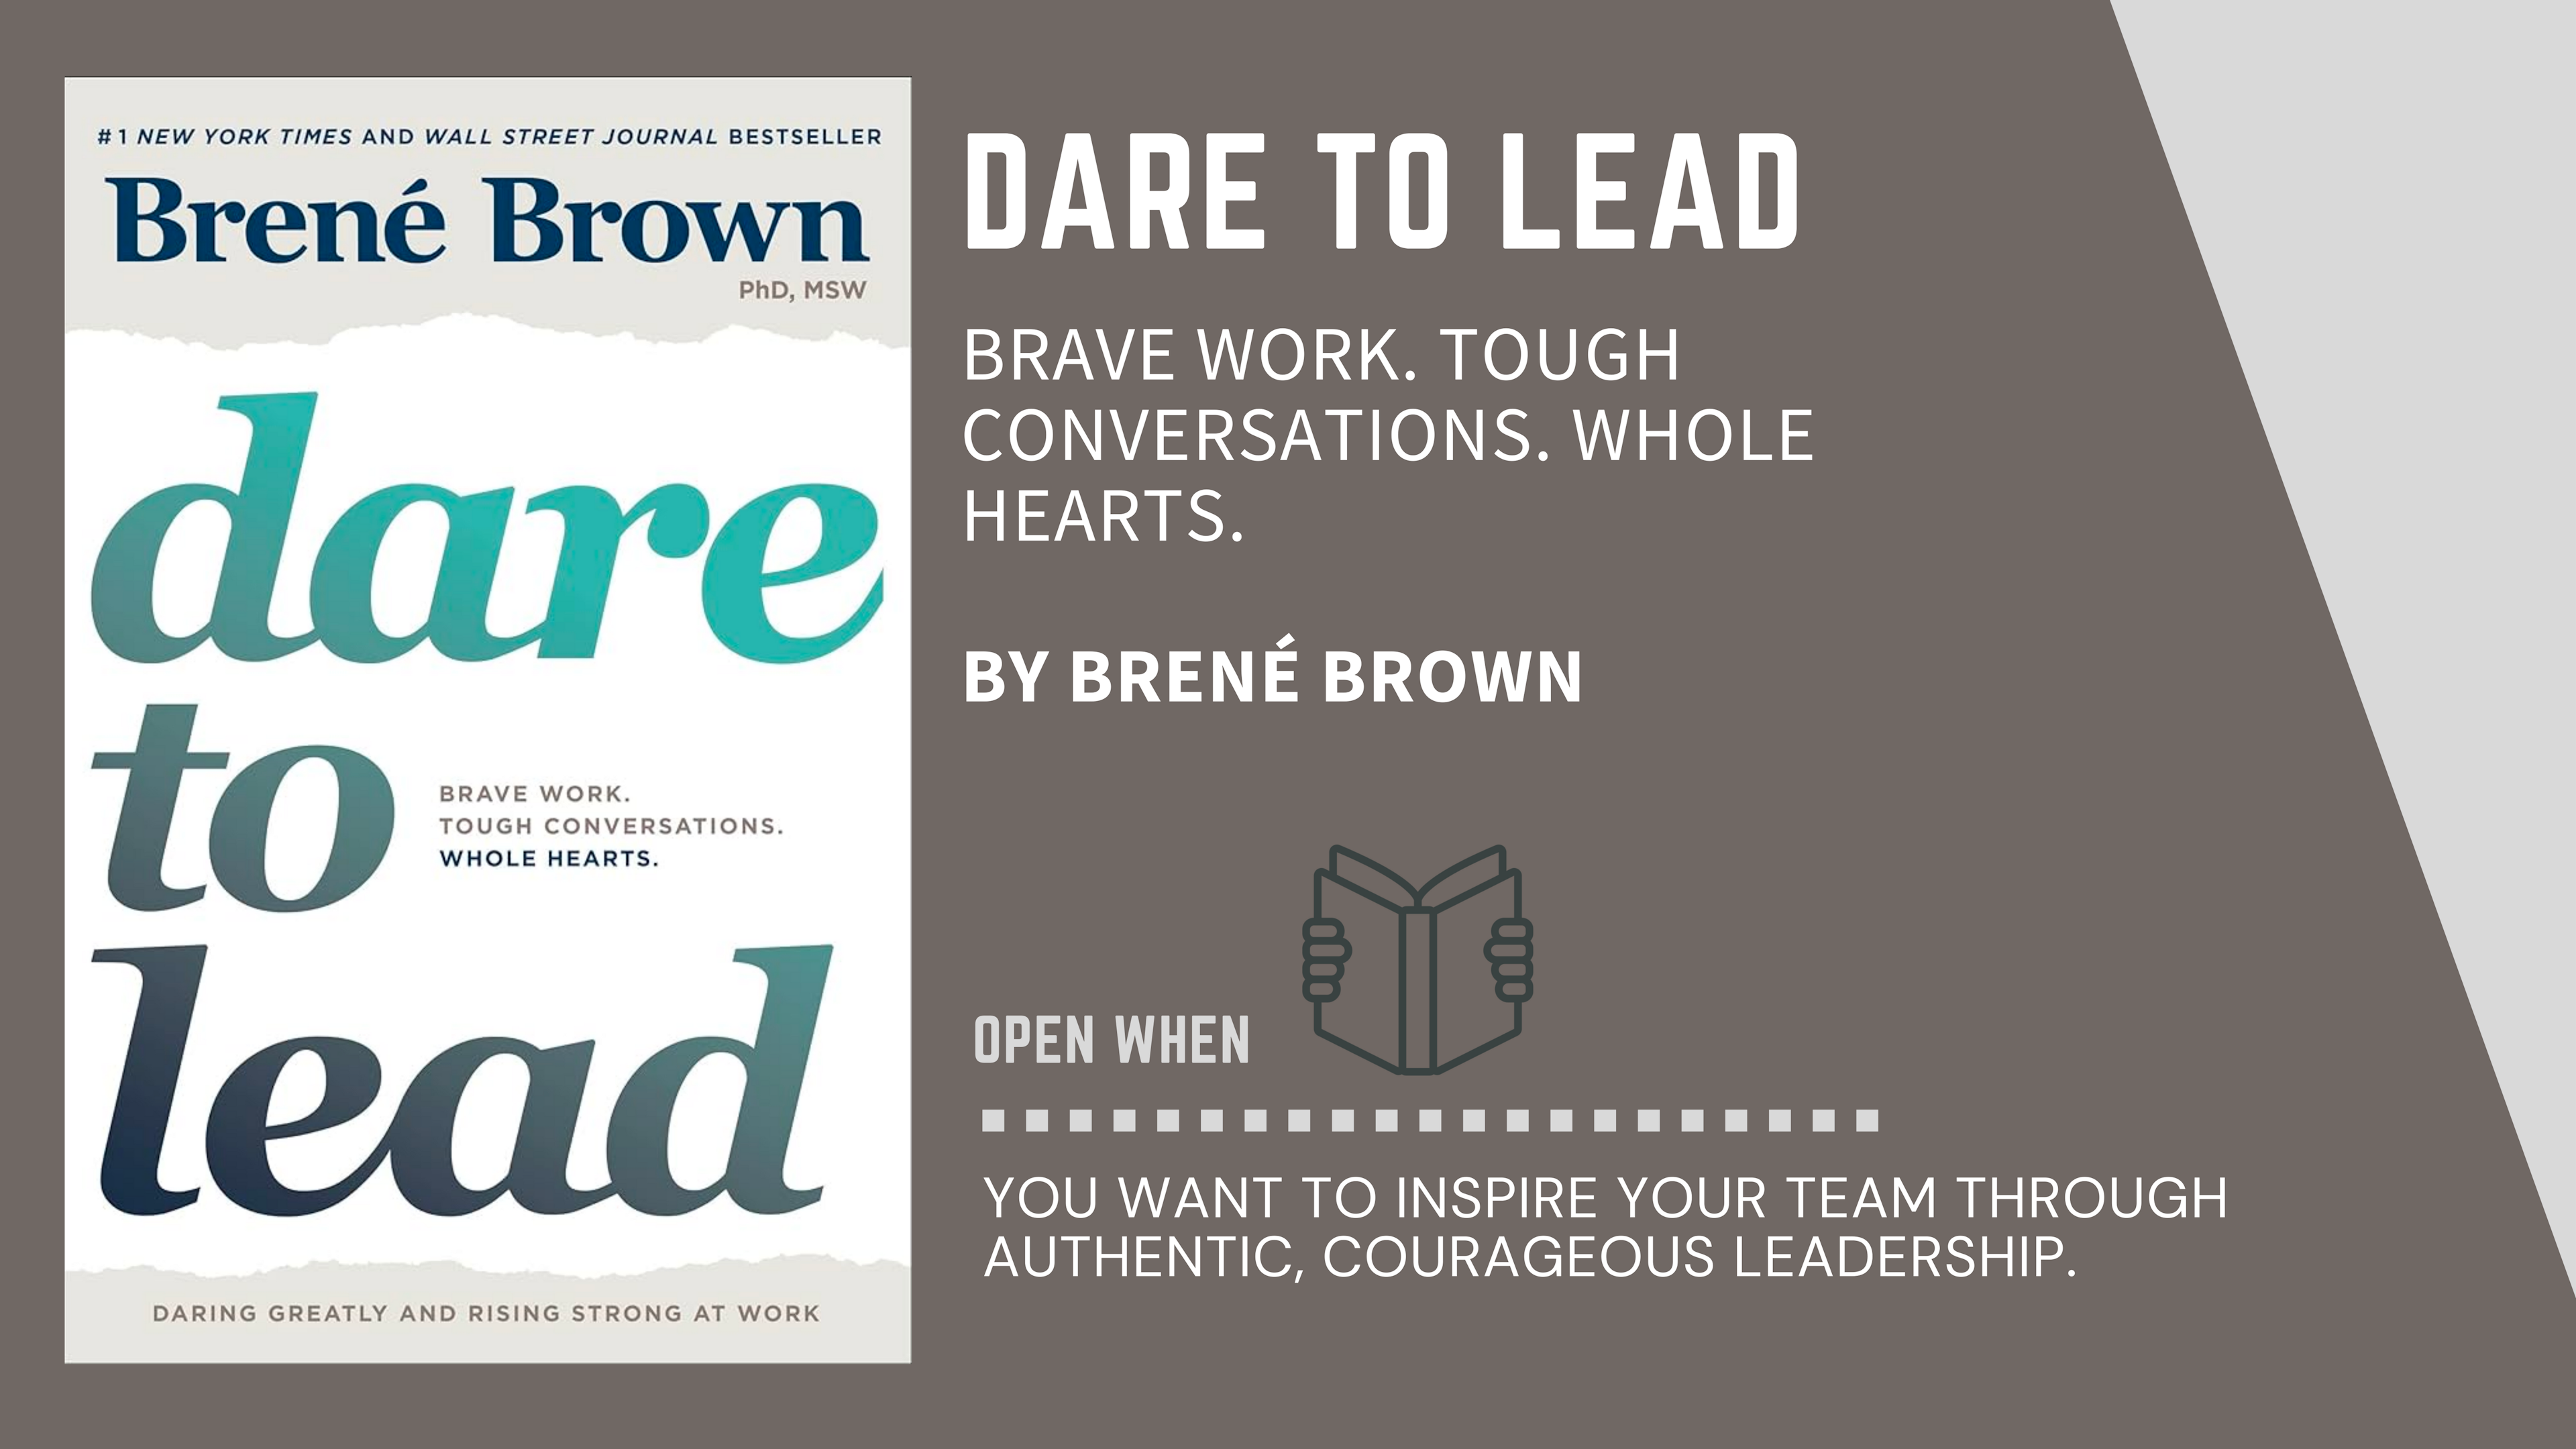 Book Cover of "Dare to Lead" by Brené Brown